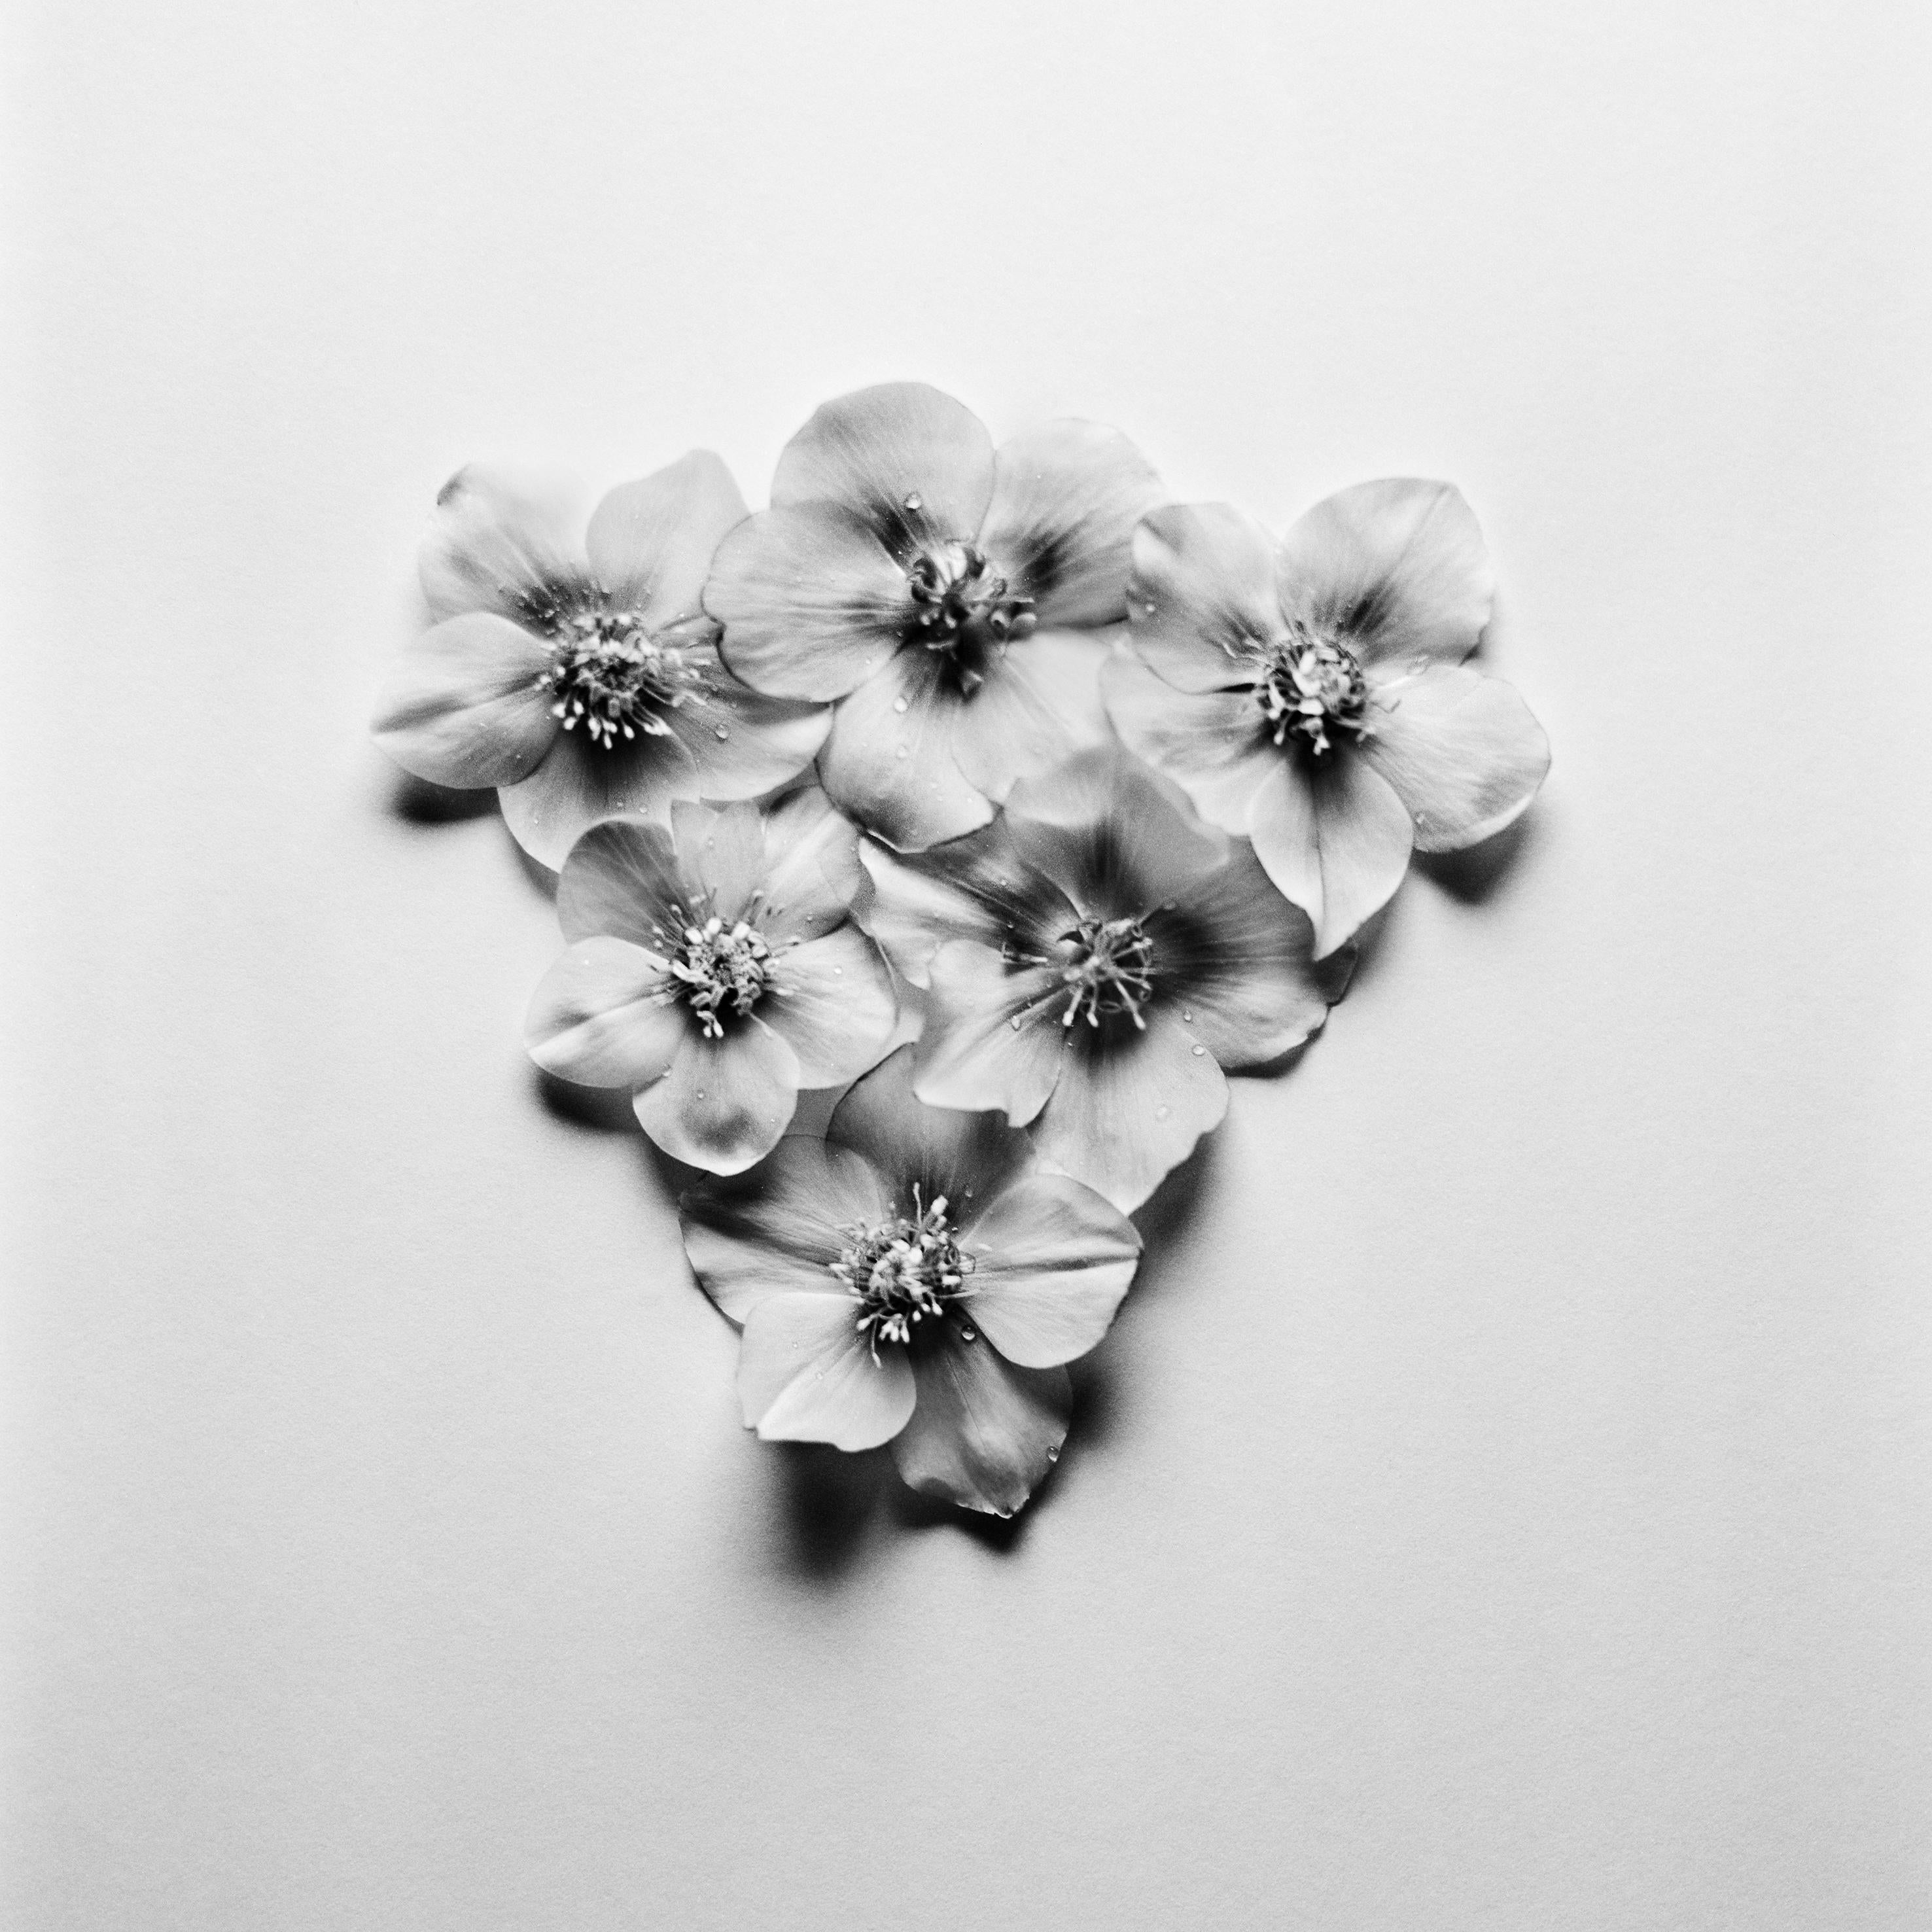 Black Hellebore No.3 - analogue black and white floral photography - Photograph by Ugne Pouwell